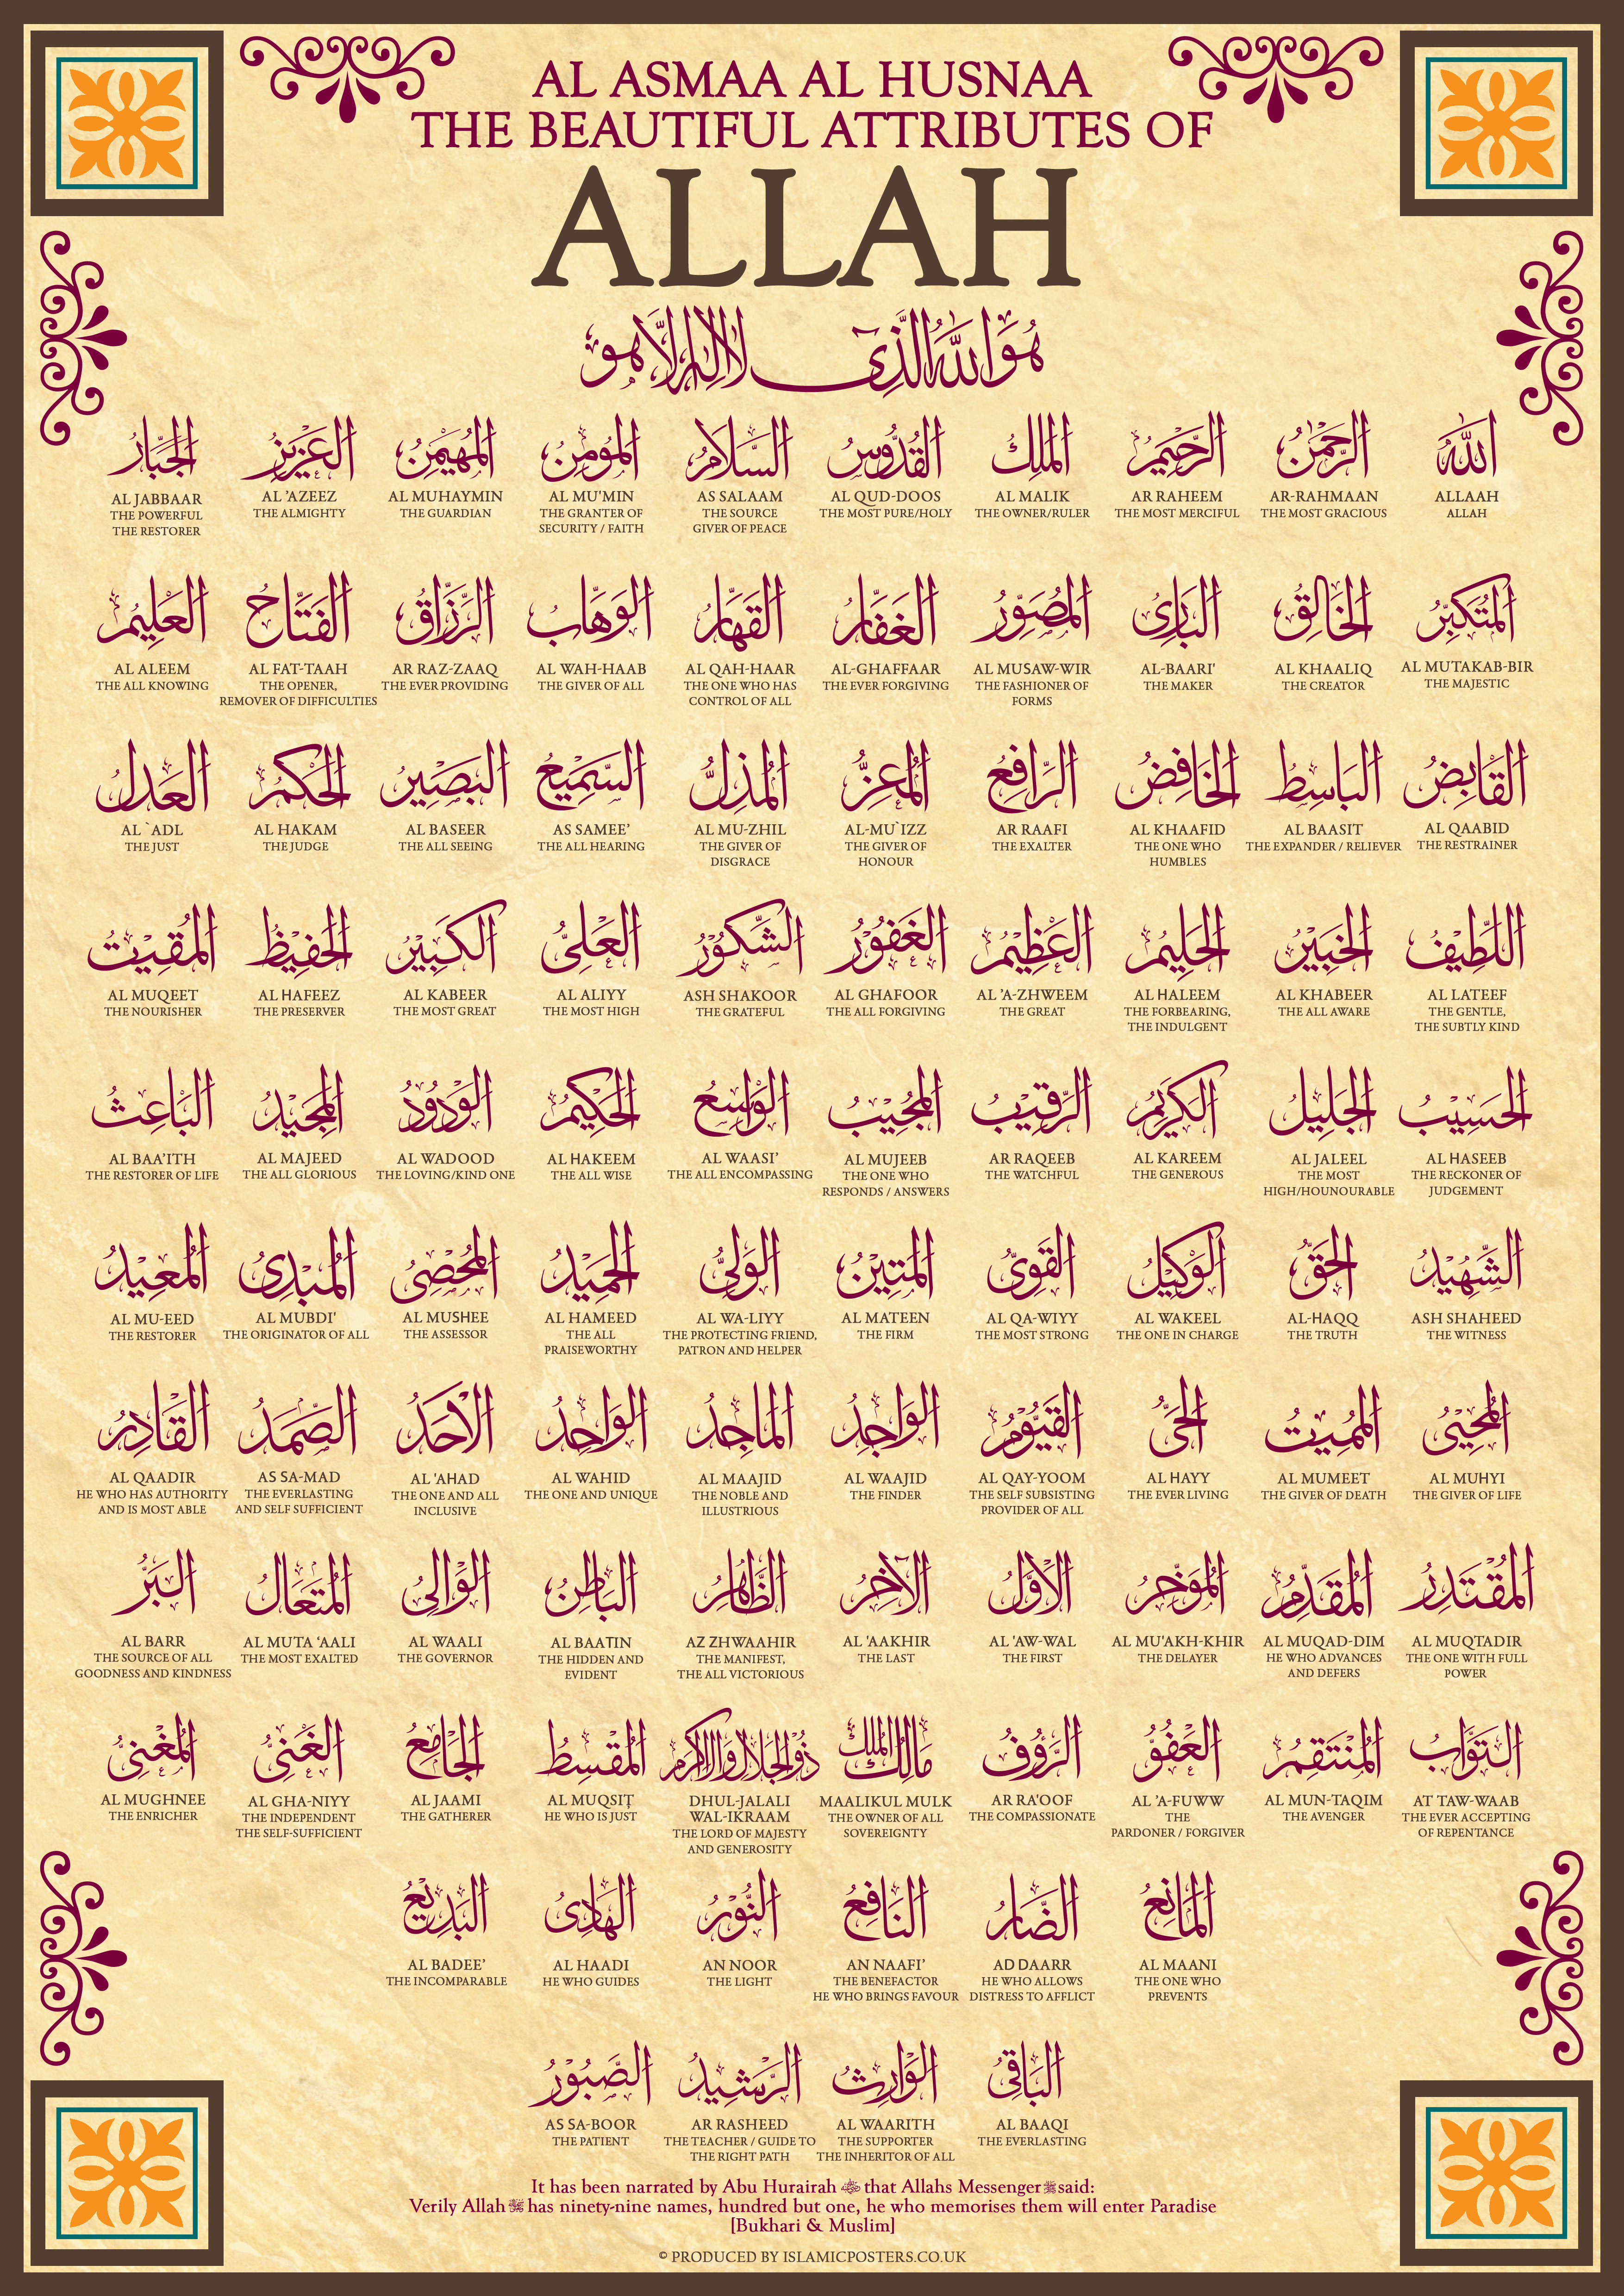 99 names of muhammad and benefits